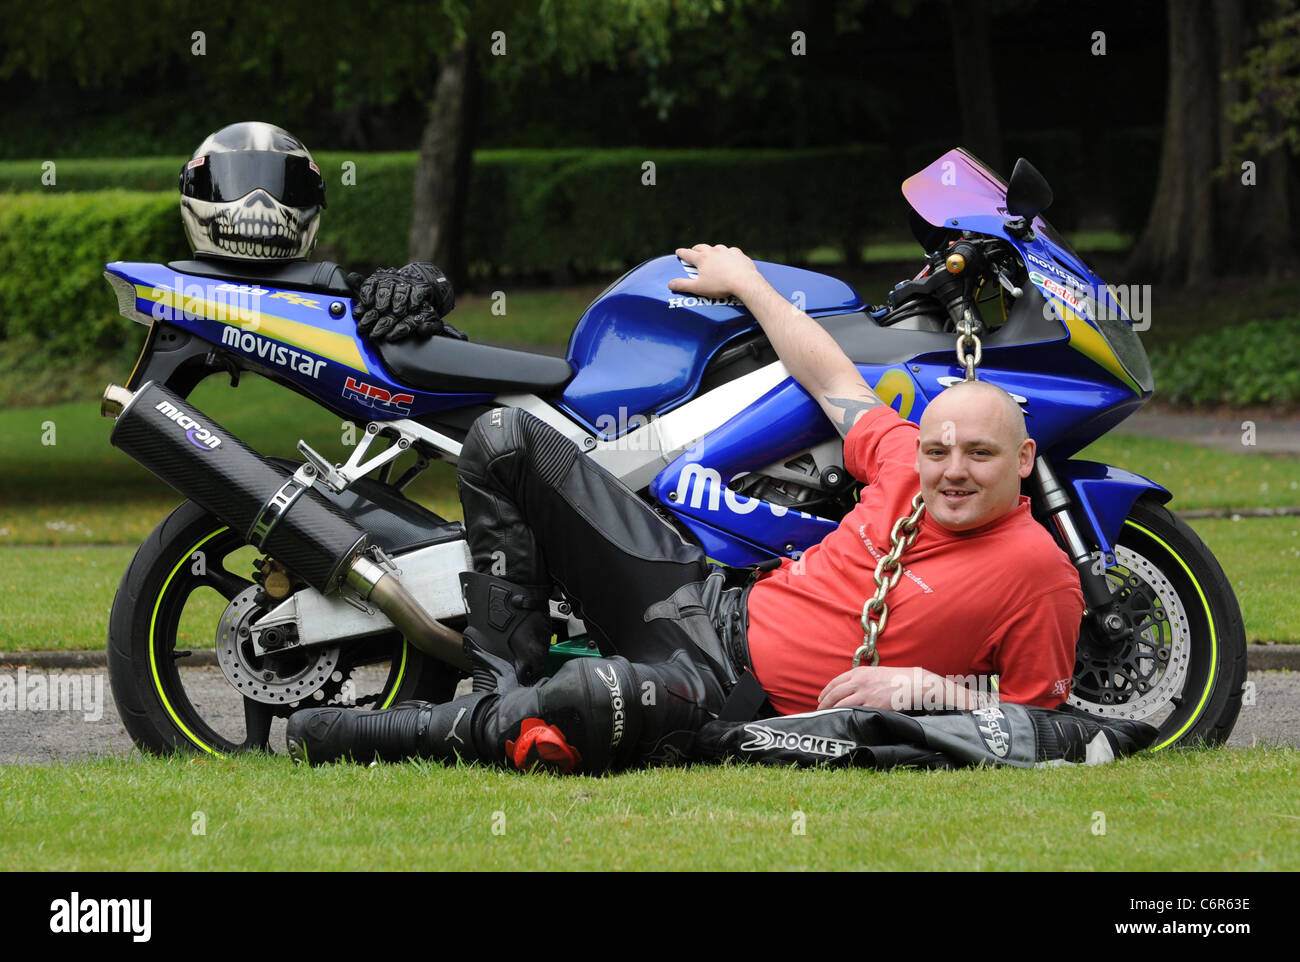 Dave Smith from Wolverhampton has been crowned 'Britain's biggest bike lover' and proved his passion by riding over 100 Stock Photo